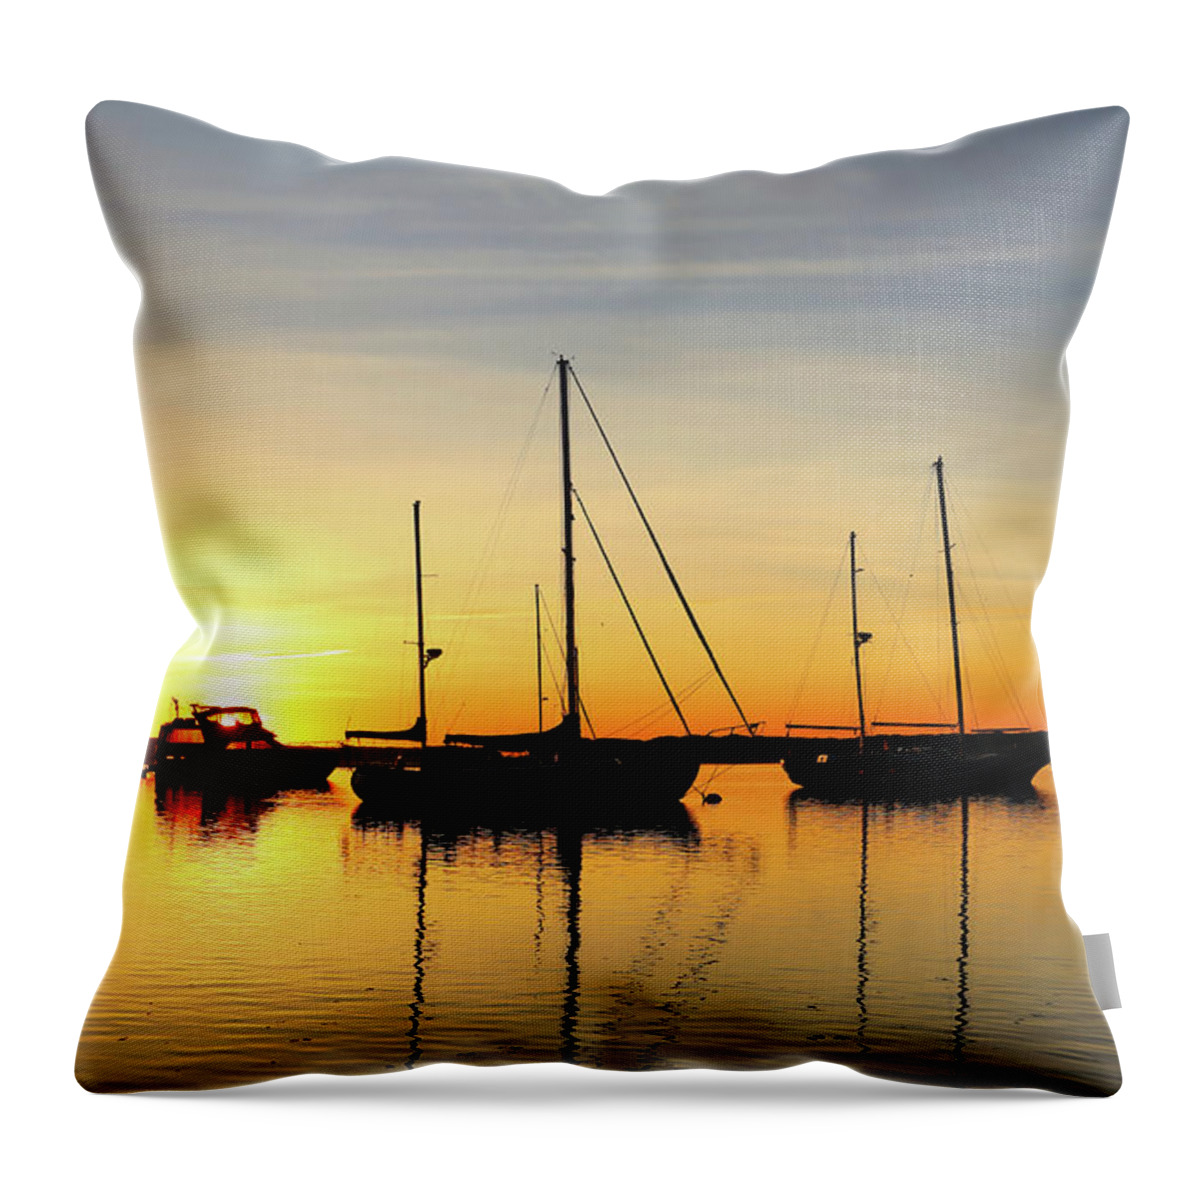 Morro Bay Throw Pillow featuring the photograph Sailboat Sunset by Vivian Krug Cotton